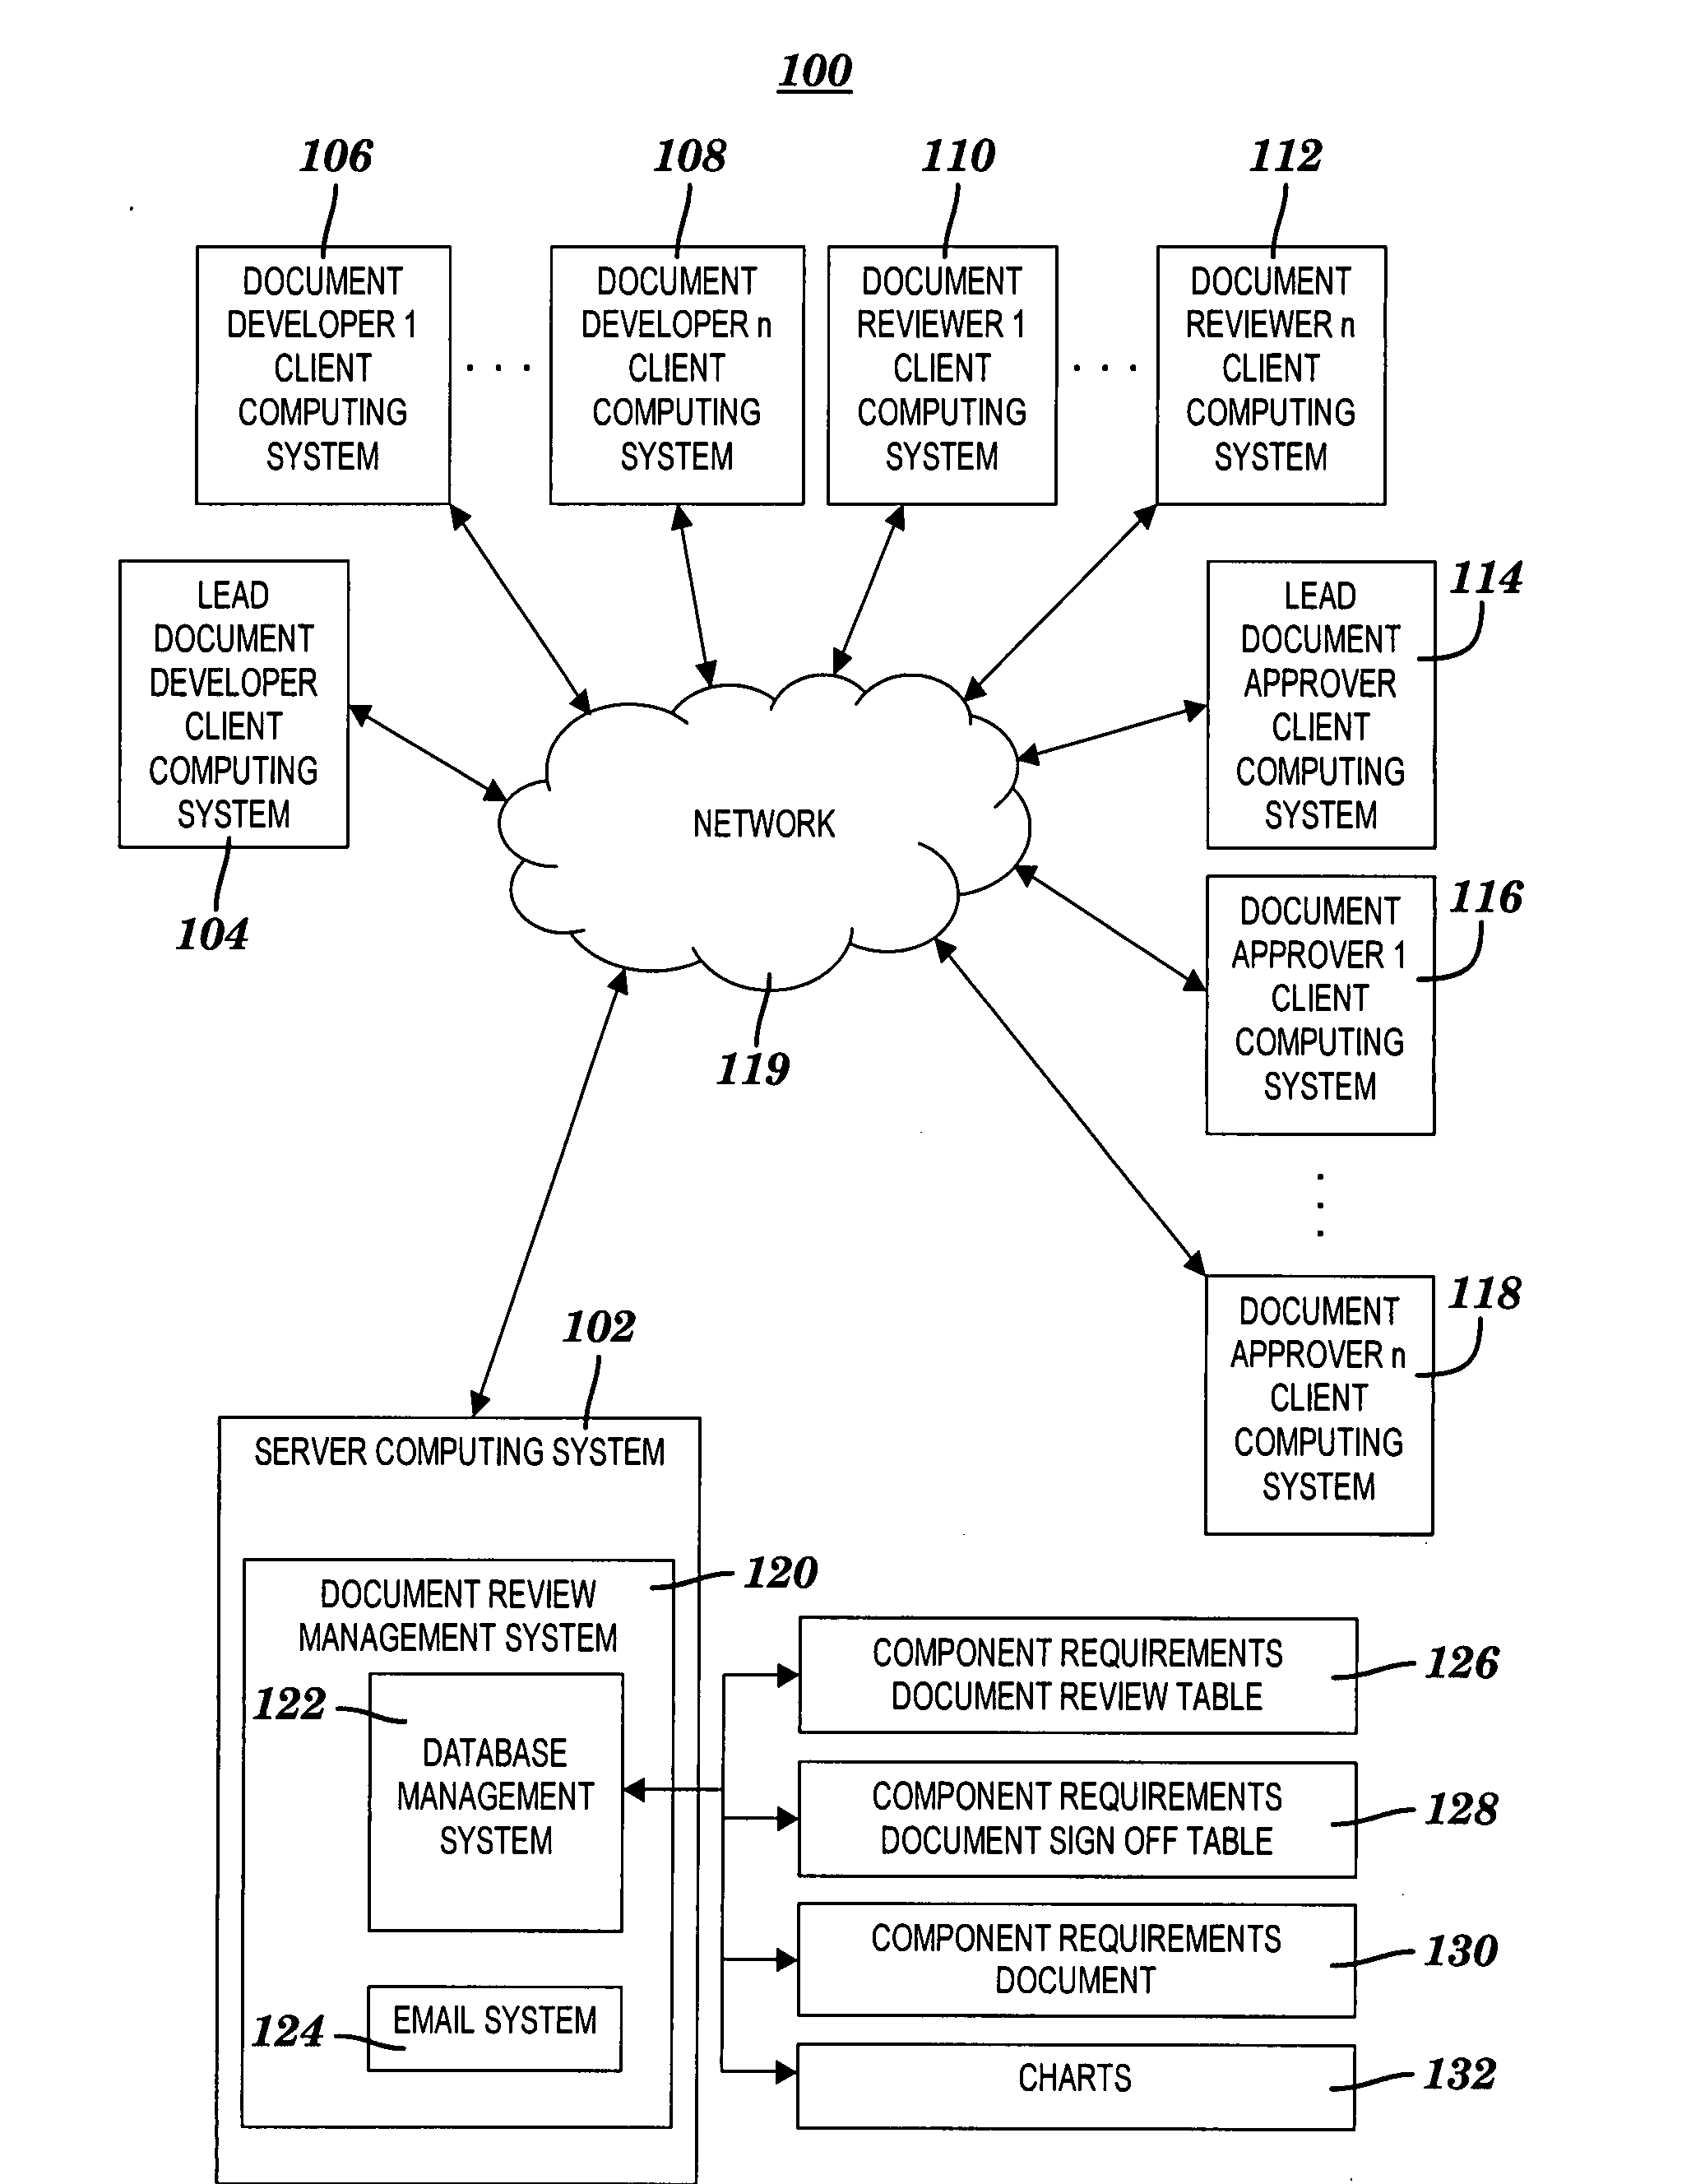 Method and system for reviewing a component requirements document and for recording approvals thereof